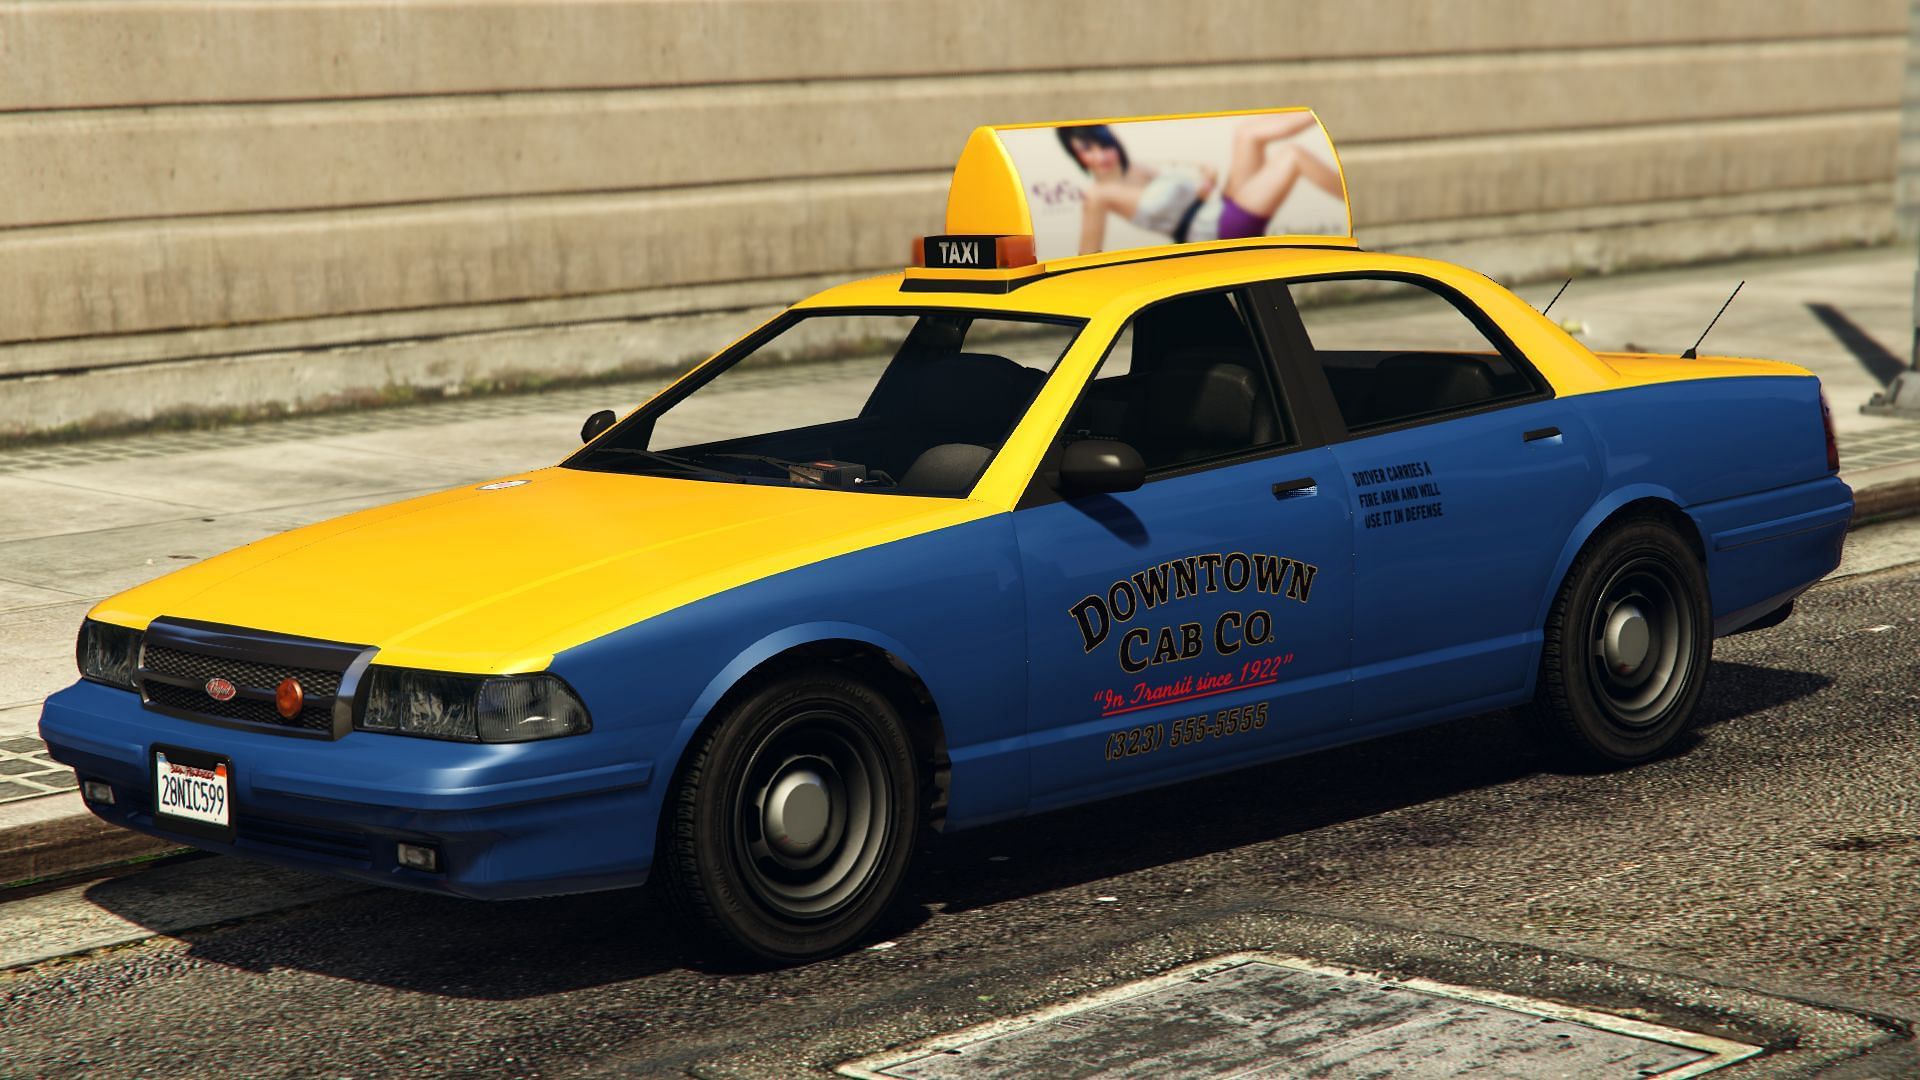 Players will also be able to buy a Taxi and do Taxi Driver fares (Image via Rockstar Games)